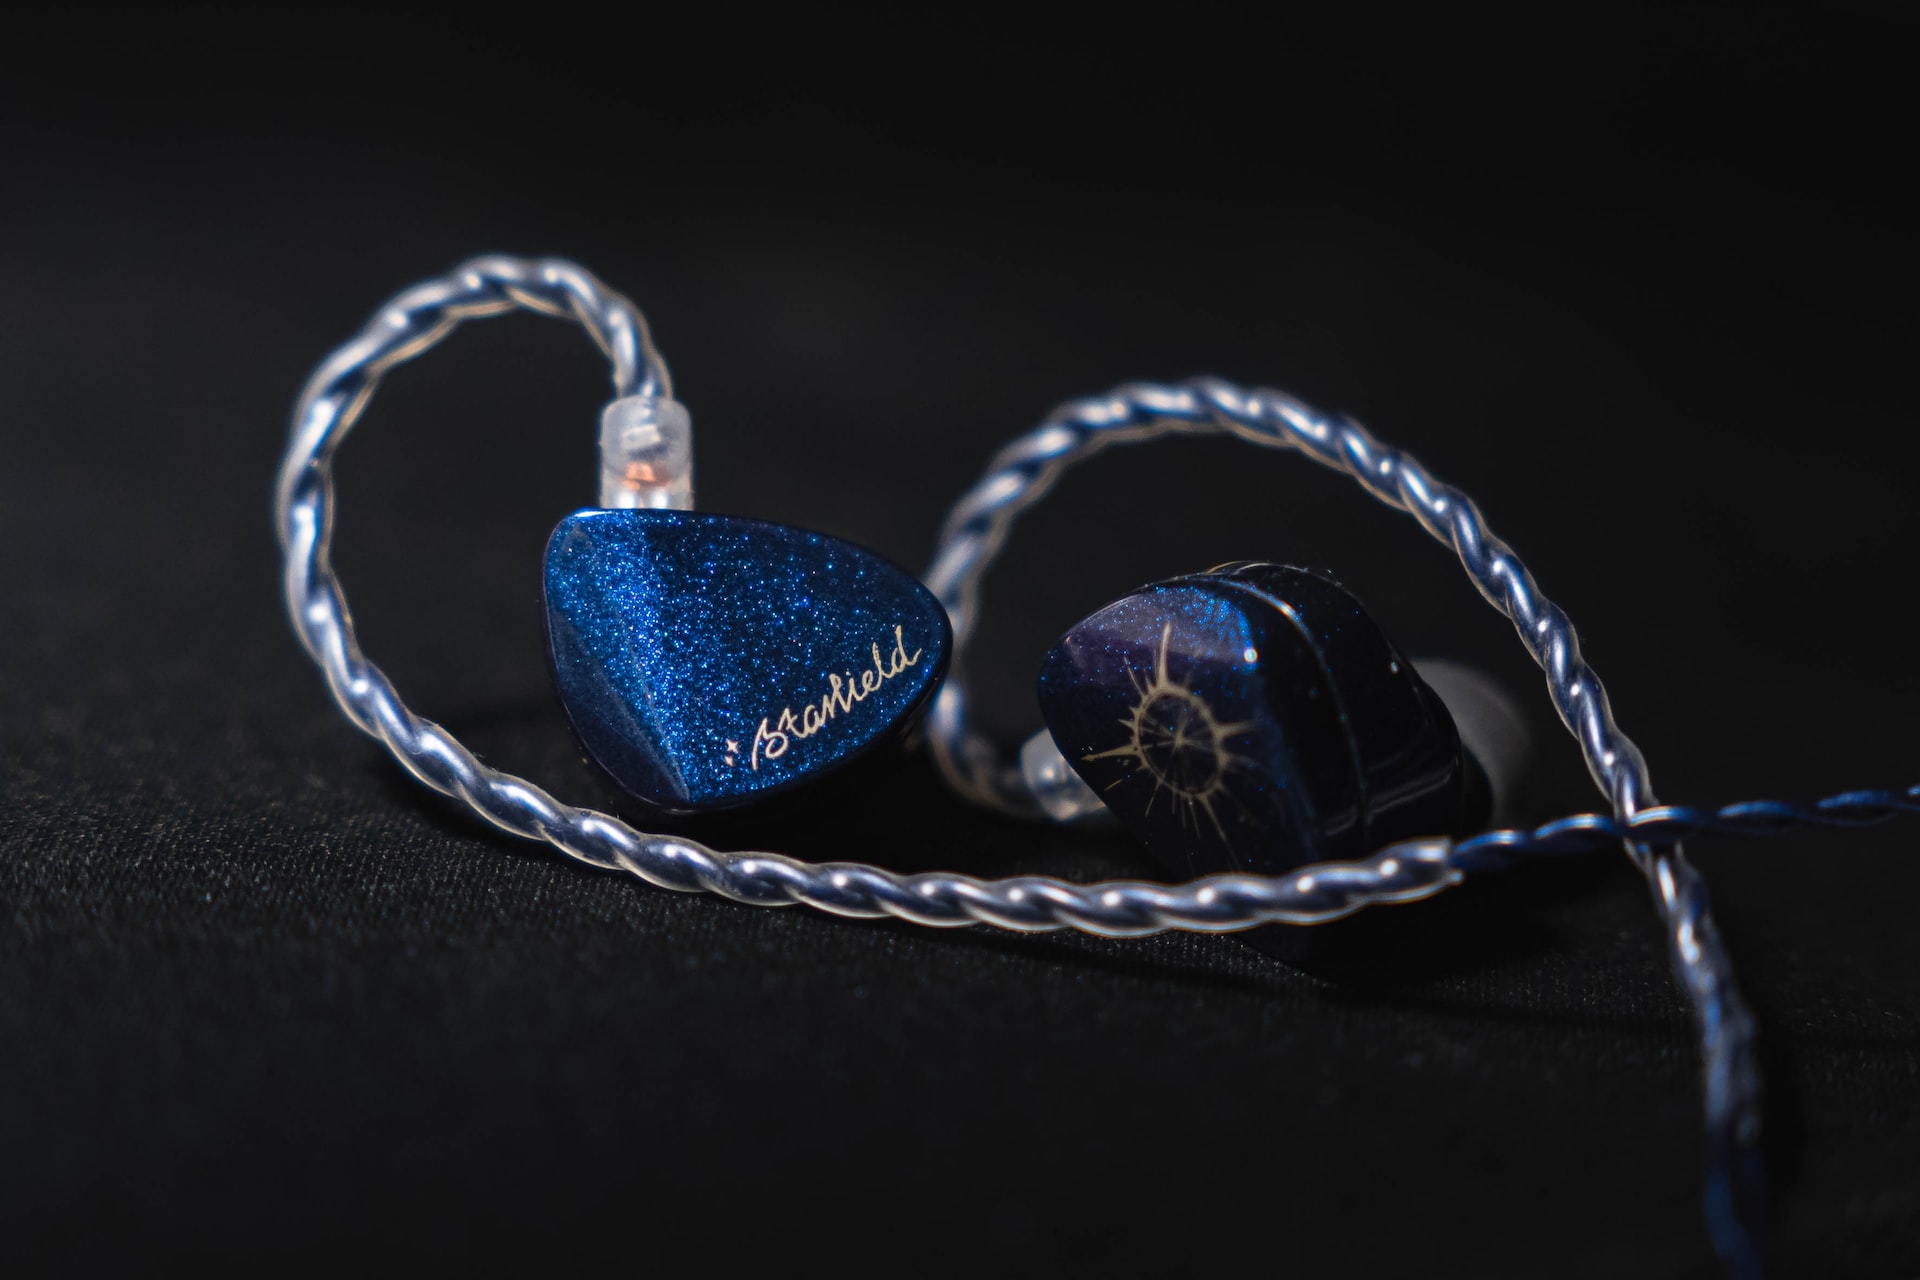 Choosing between IEM vs headphones can all come down to what you're willing to spend.